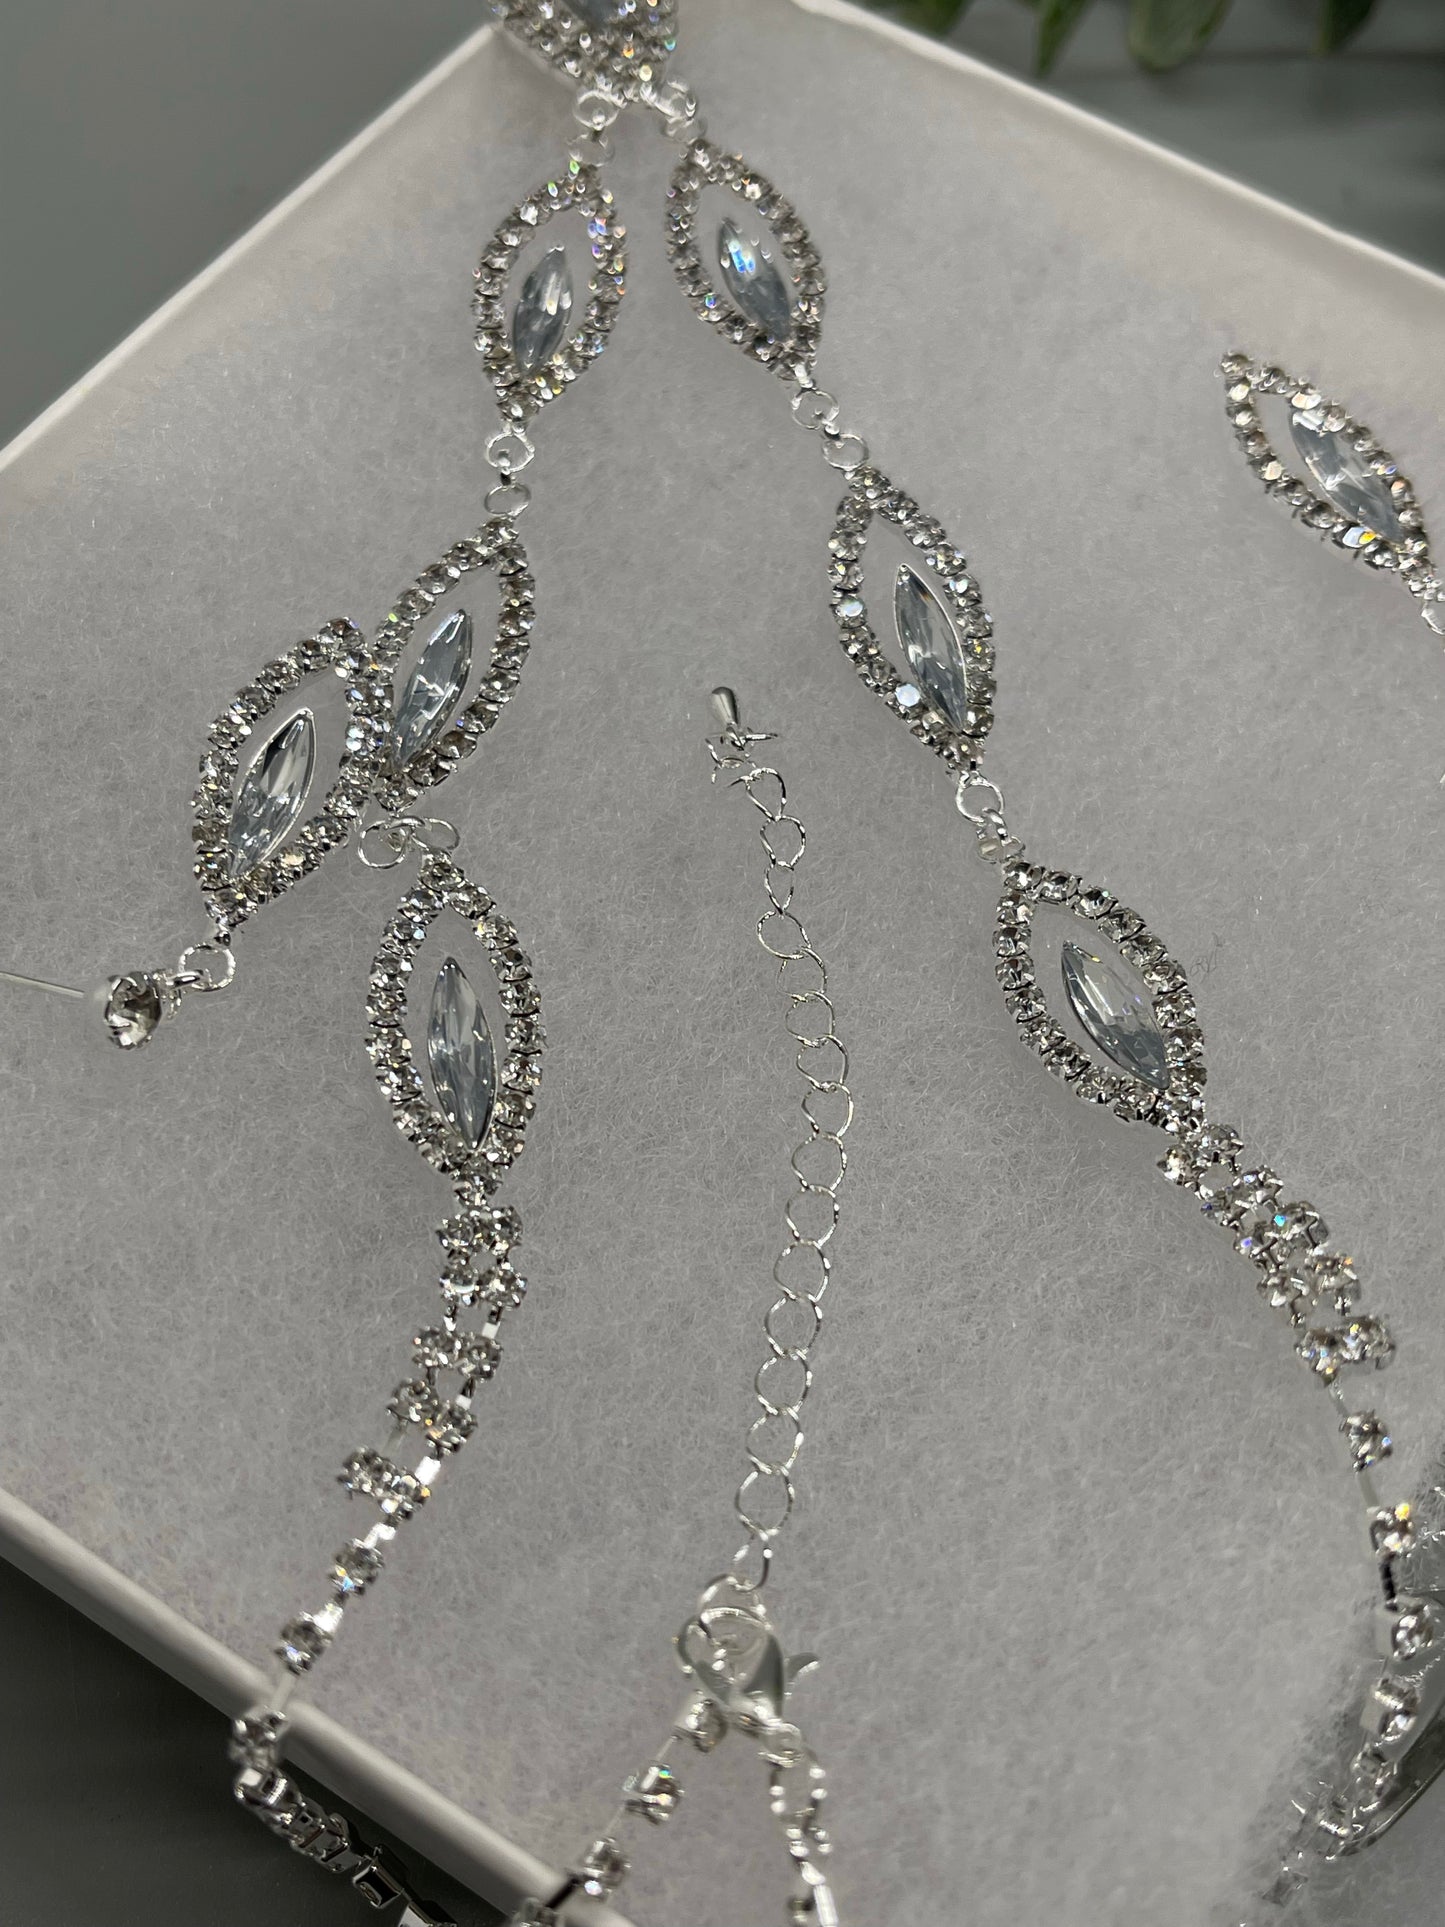 Clear Crystal Rhinestone necklace earrings set bridal wedding engagement formal accessory accessories